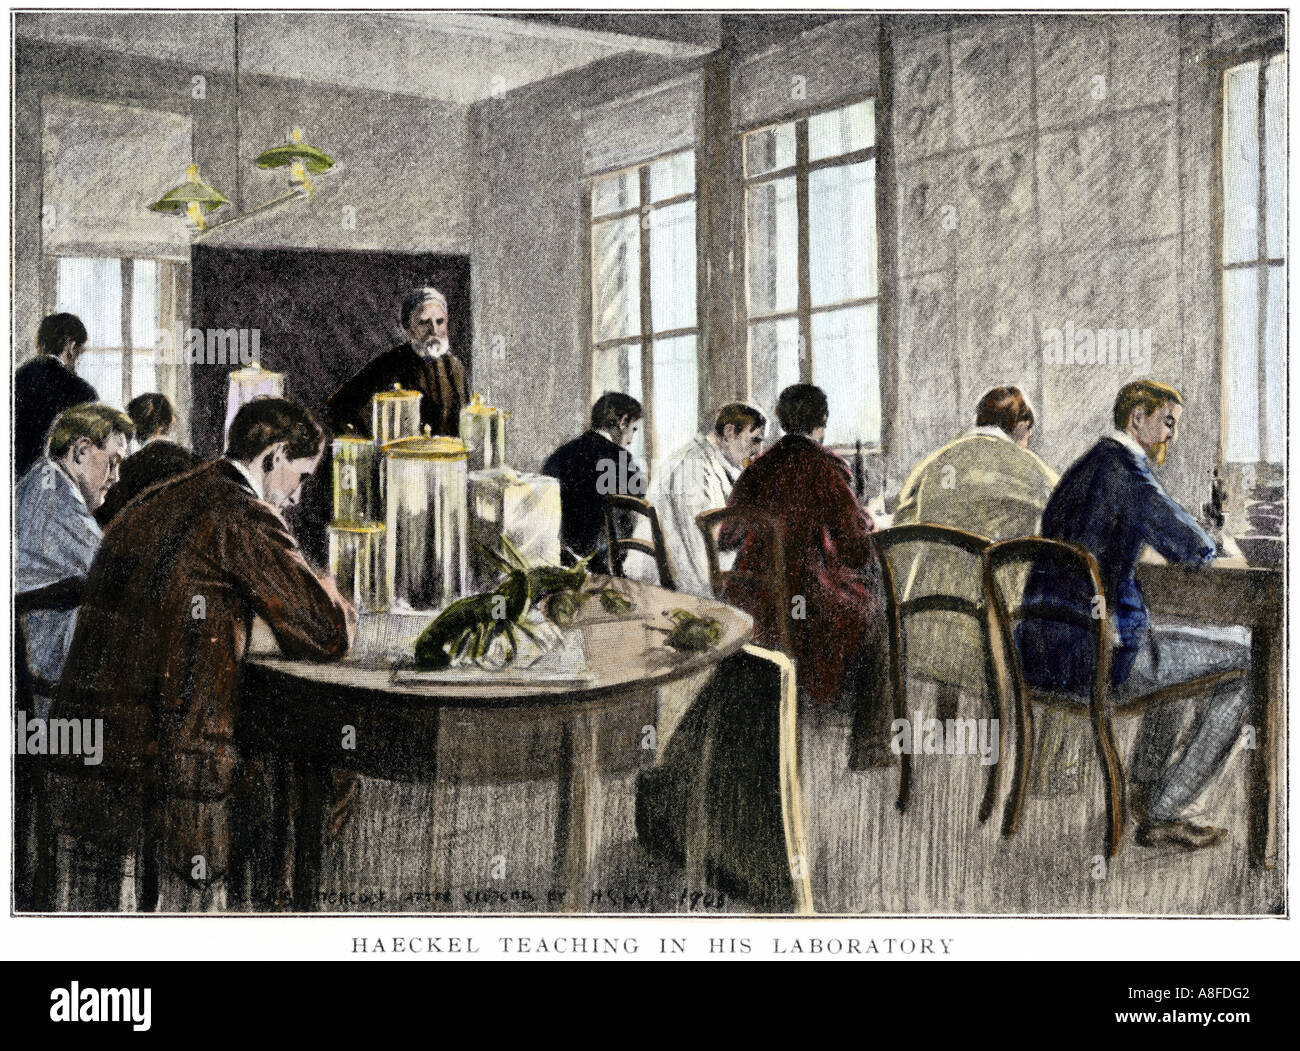 Ernst Haeckel teaching in his laboratory at Jena University in Germany. Hand-colored halftone of an illustration Stock Photo